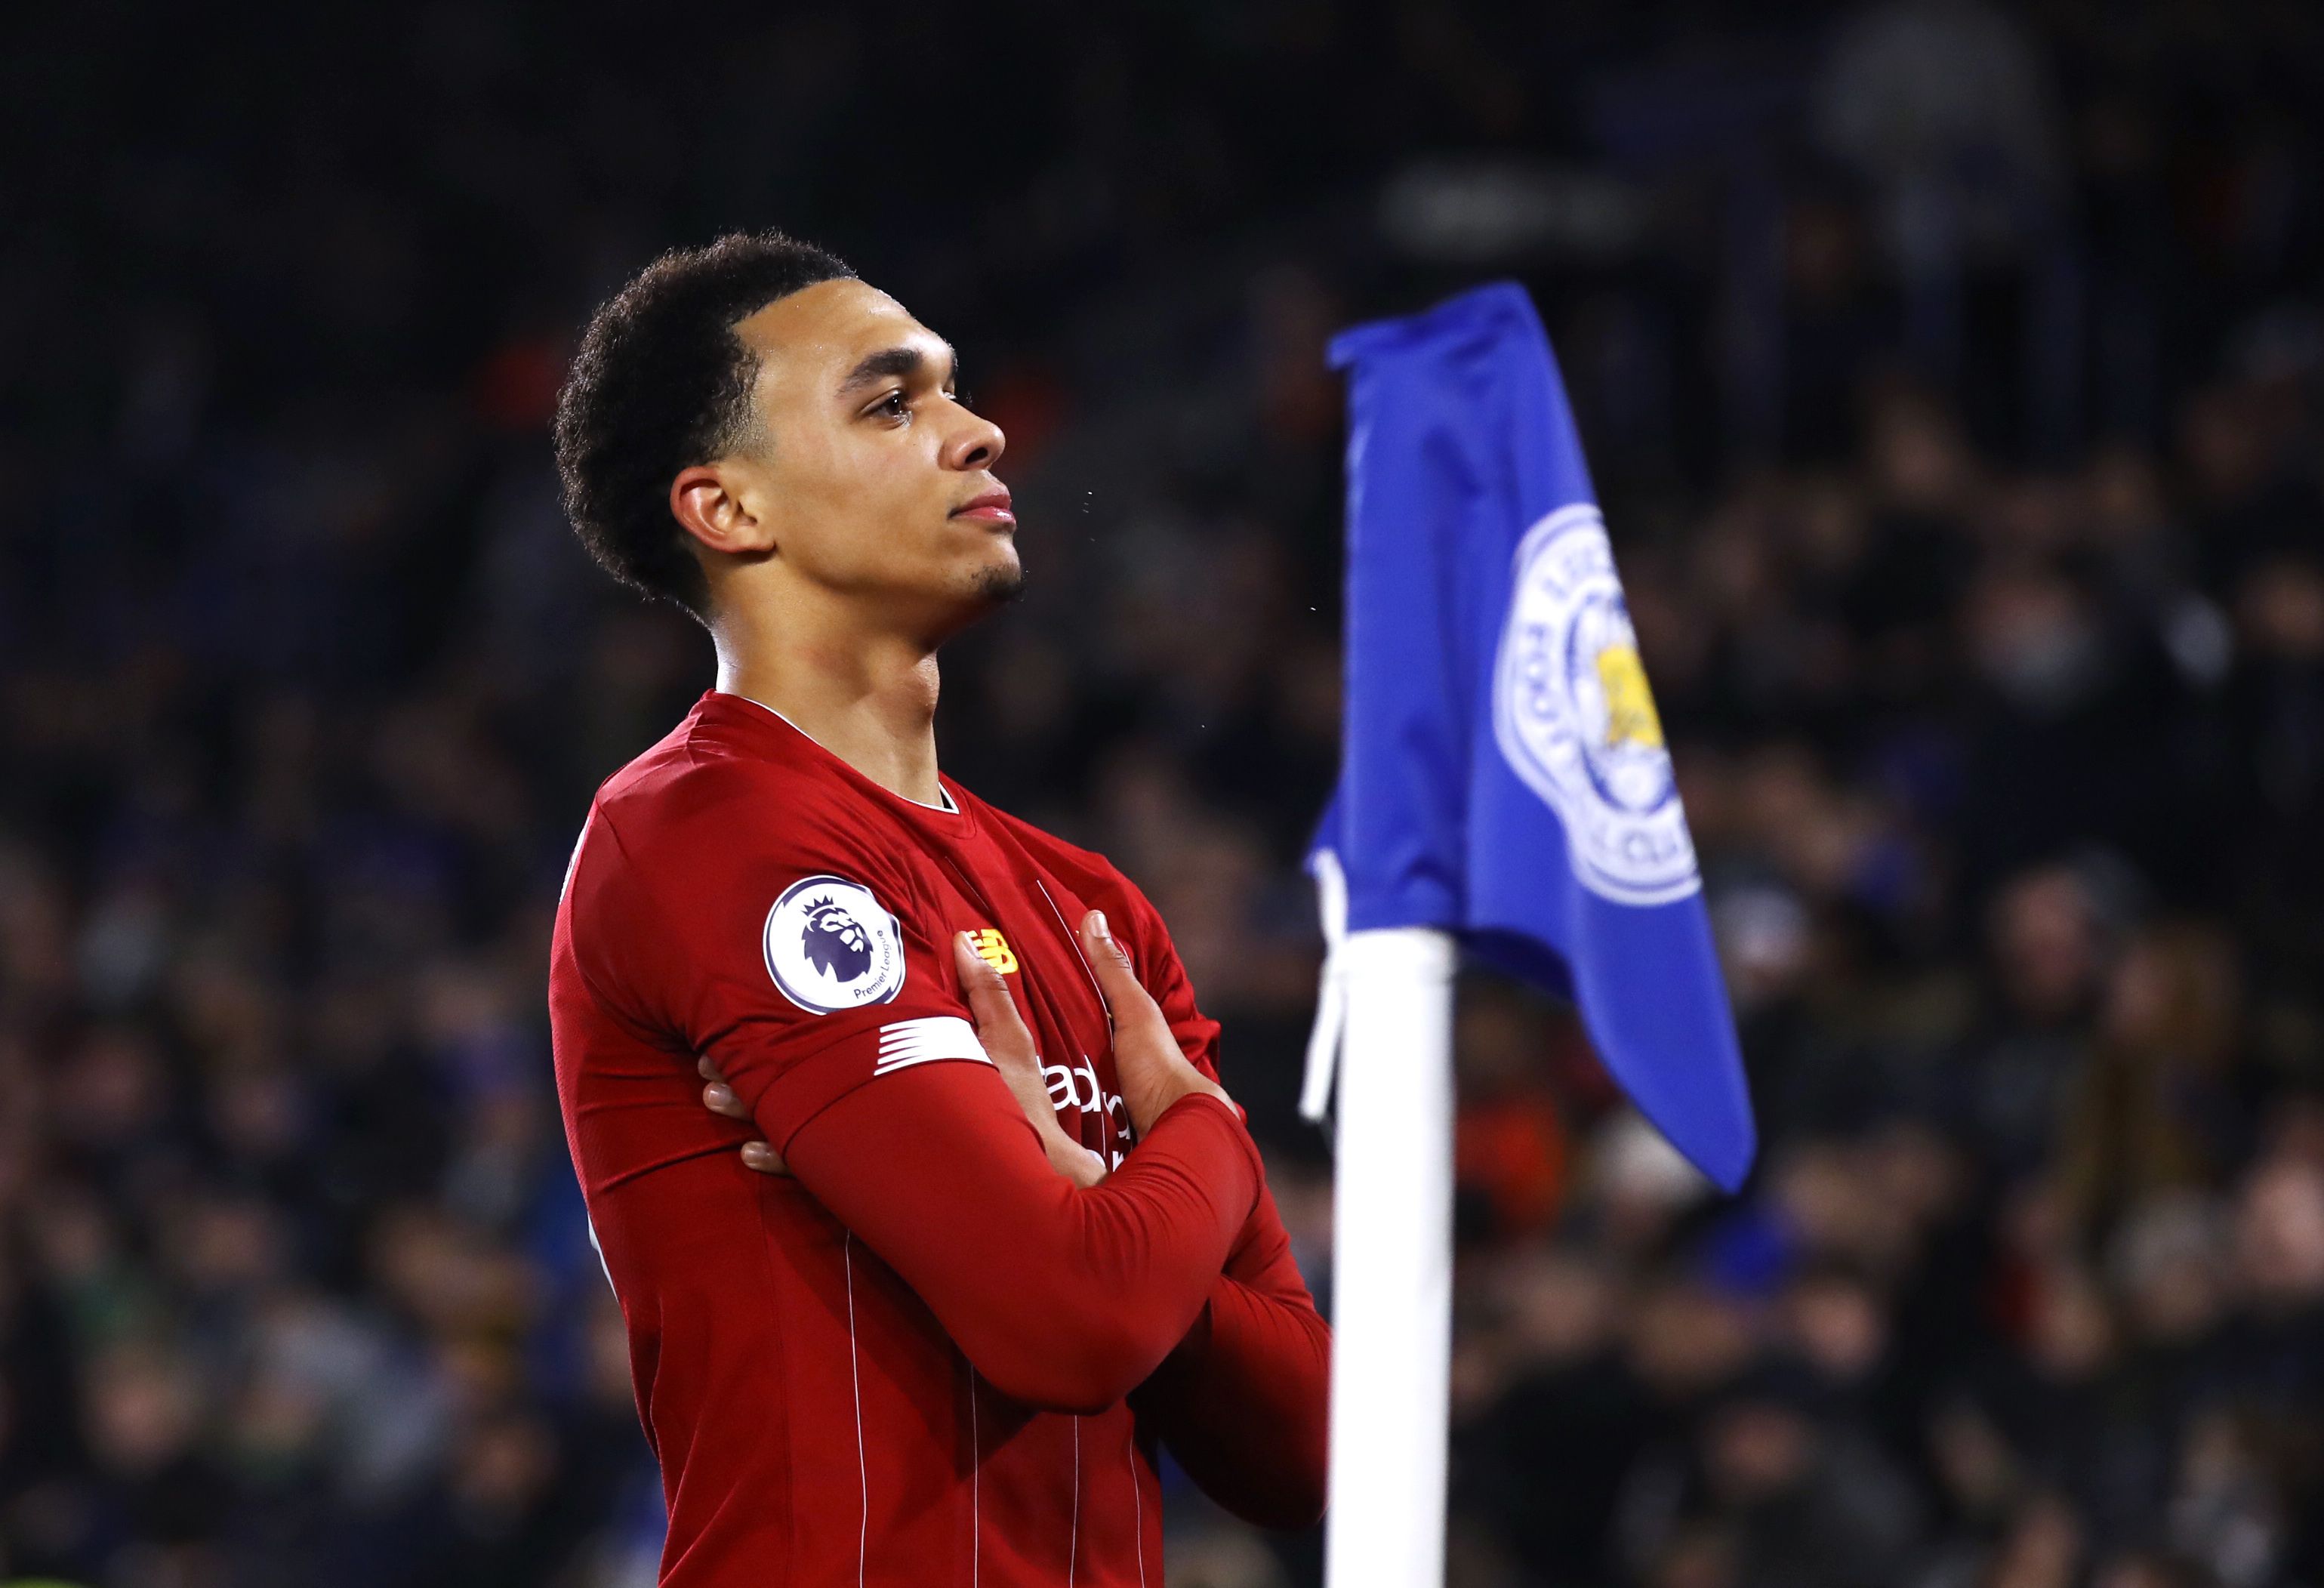 Kylian Mbappe Responds To Trent Alexander Arnold's Celebration In Liverpool's Victory Over Leicester City